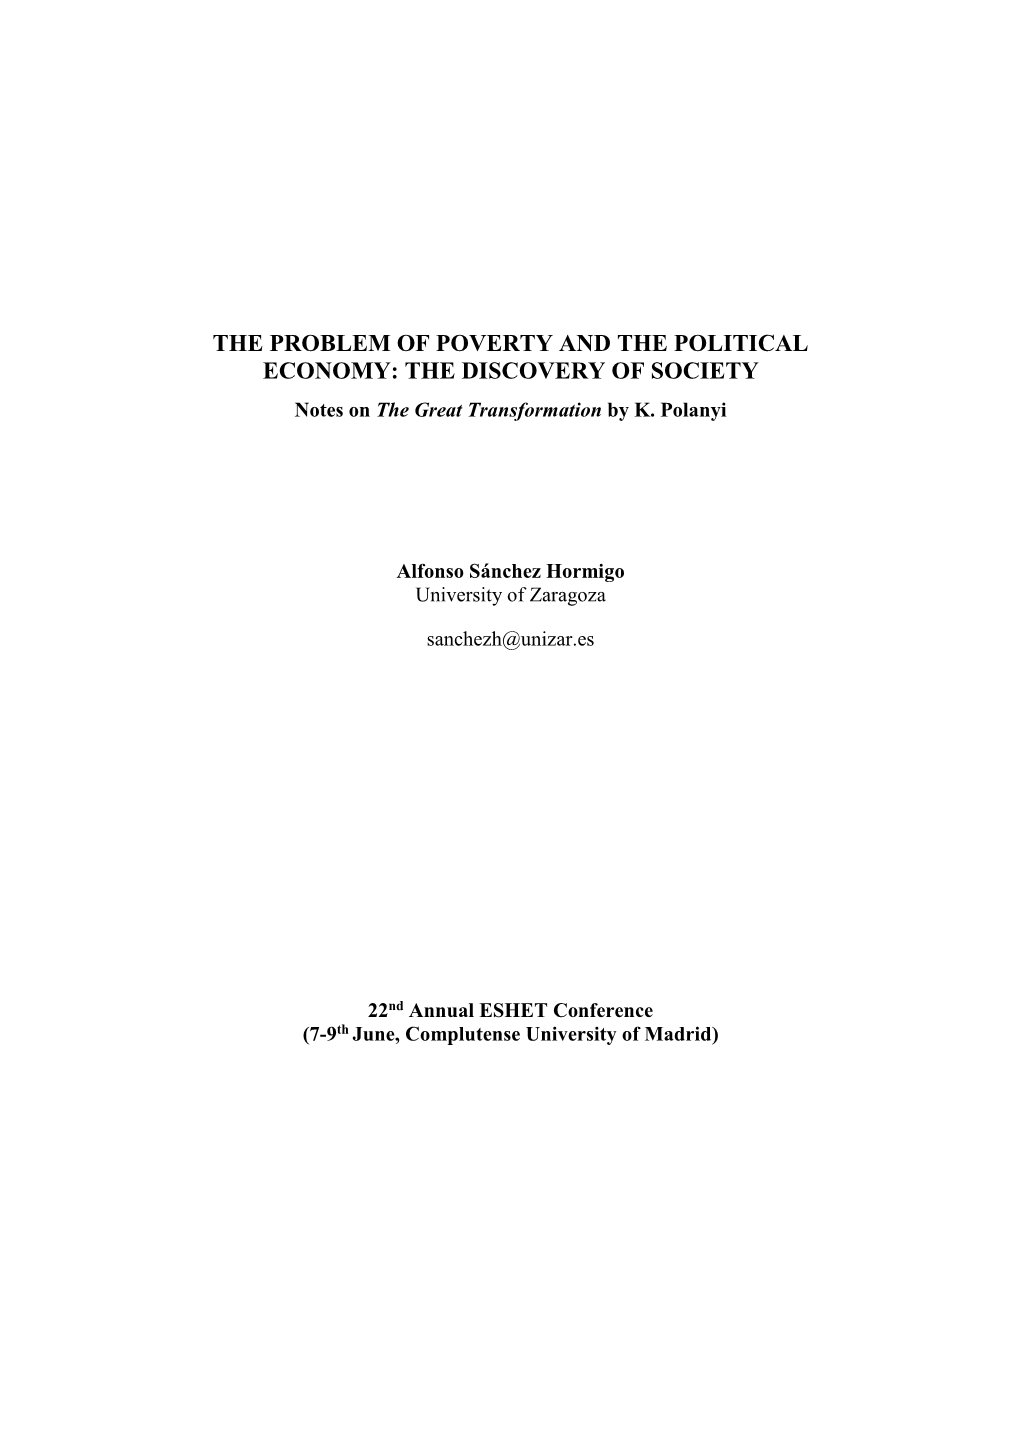 THE PROBLEM of POVERTY and the POLITICAL ECONOMY: the DISCOVERY of SOCIETY Notes on the Great Transformation by K